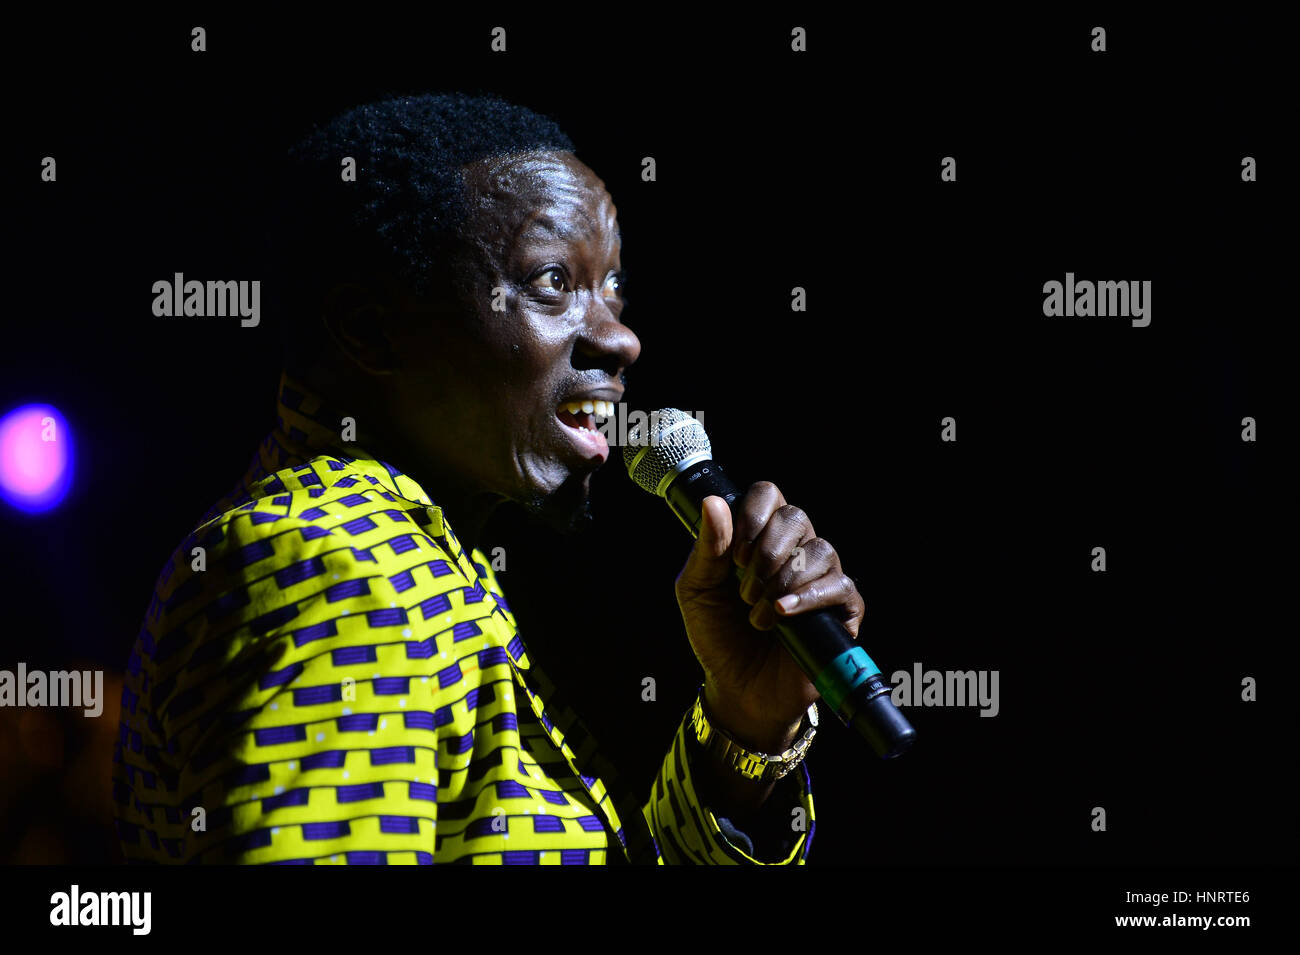 Michael Blackson backstage at the Miami Festival of Laughs at James L  Knight Center in Miami, Florida. Featuring: Michael Blackson Where: Miami,  Florida, United States When: 14 Jan 2017 Credit: JLN Photography/WENN.com